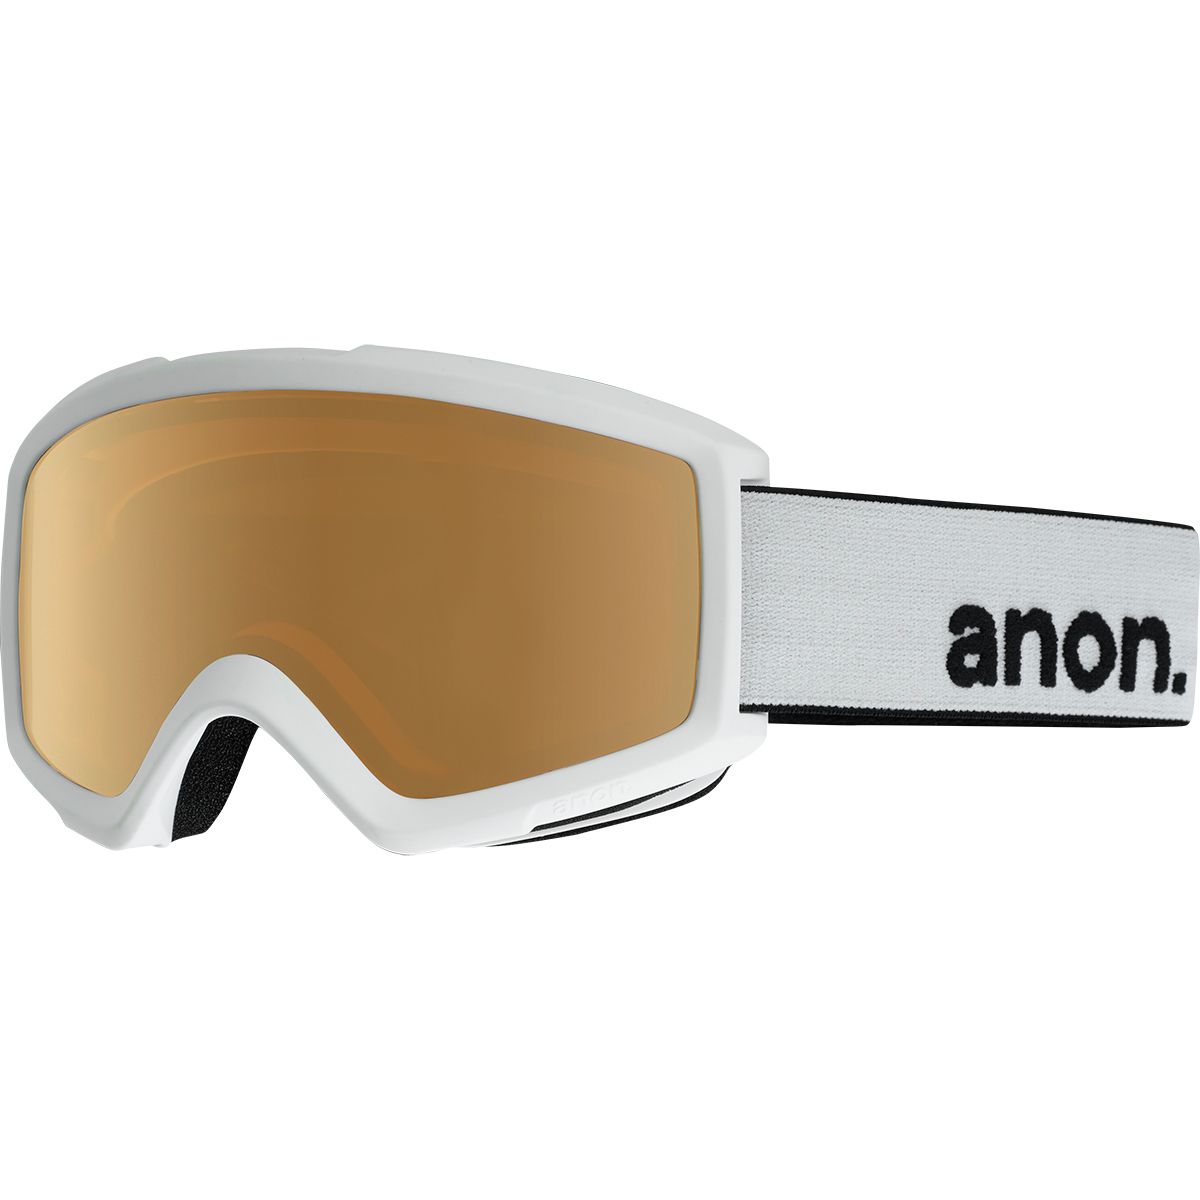 Anon Helix 2.0 Goggles